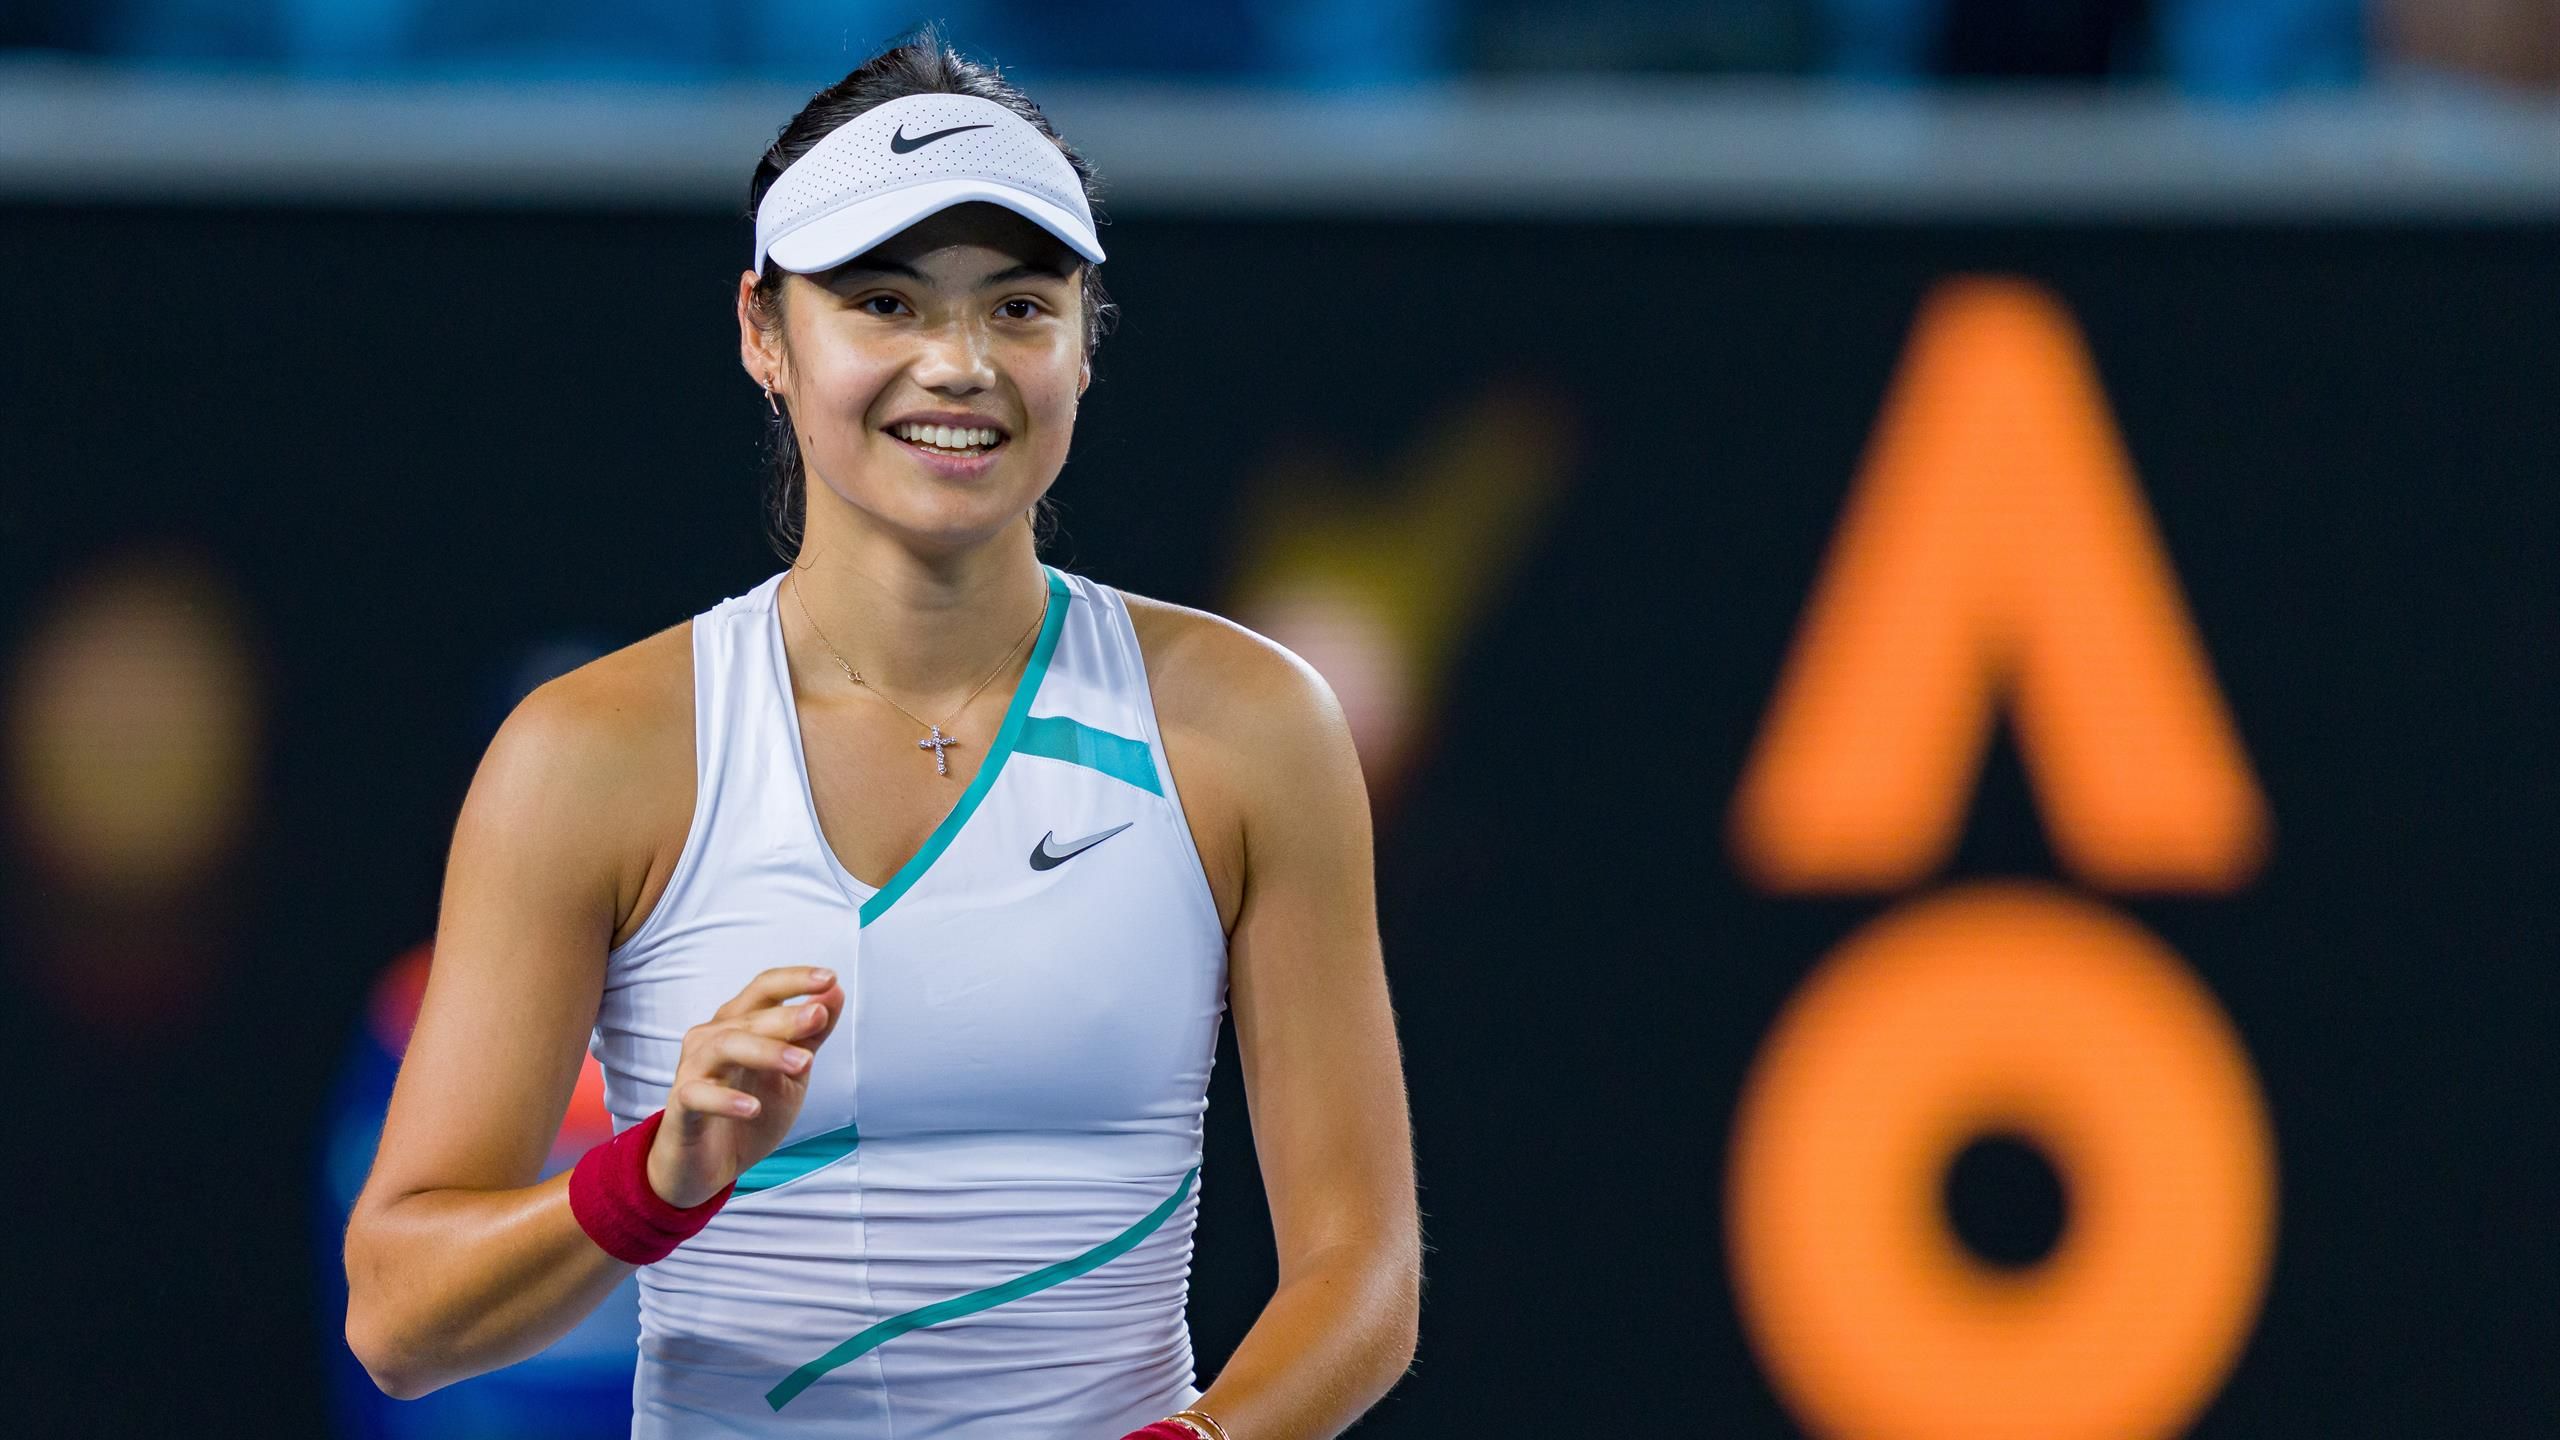 When does Emma Raducanu play next match? How to watch Australian Open 2022 live on TV and stream